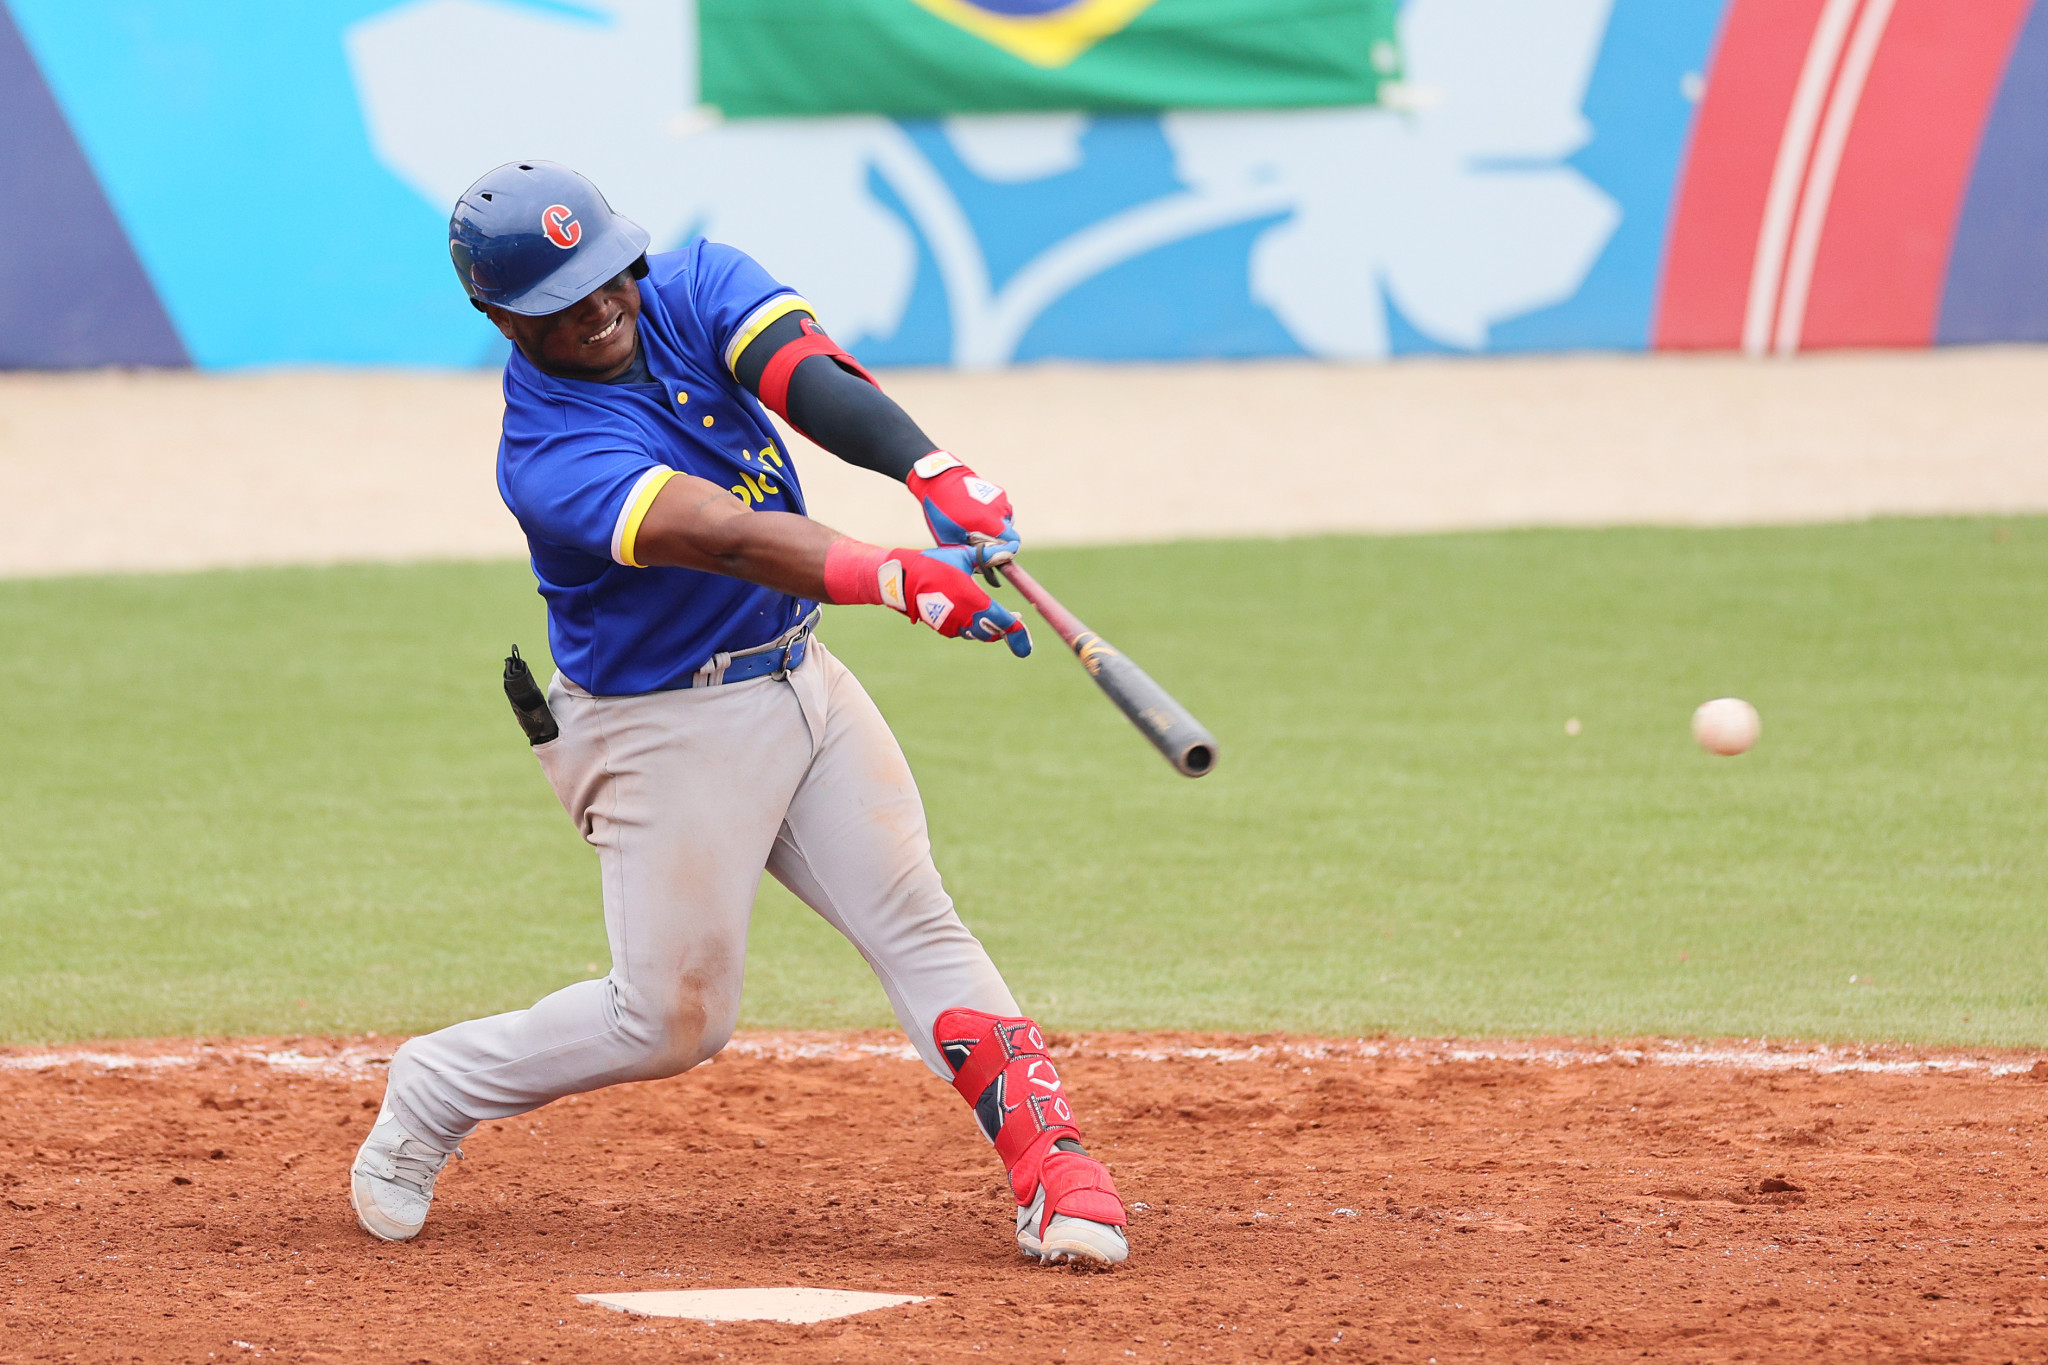 Dilson Herrera scored two runs in the sixth inning to help Colombia win their first medal in baseball at the Pan American Games for 52 years ©Getty Images